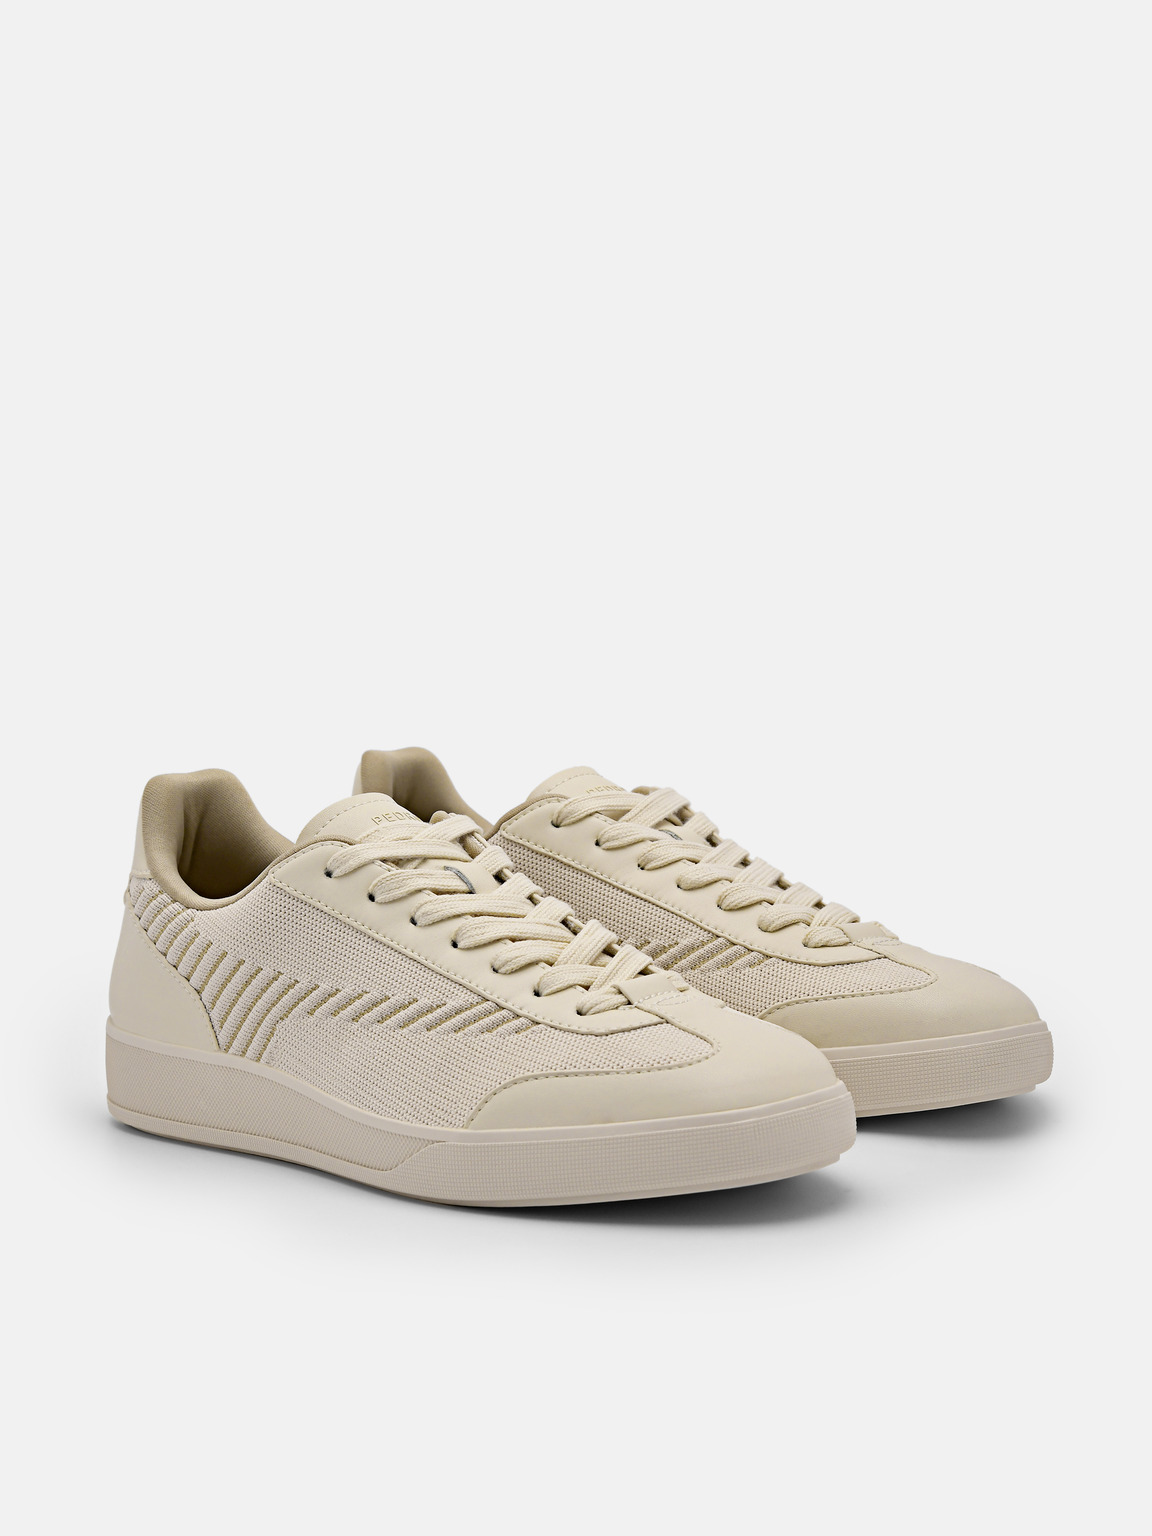 rePEDRO Knitted Sneakers, Sand